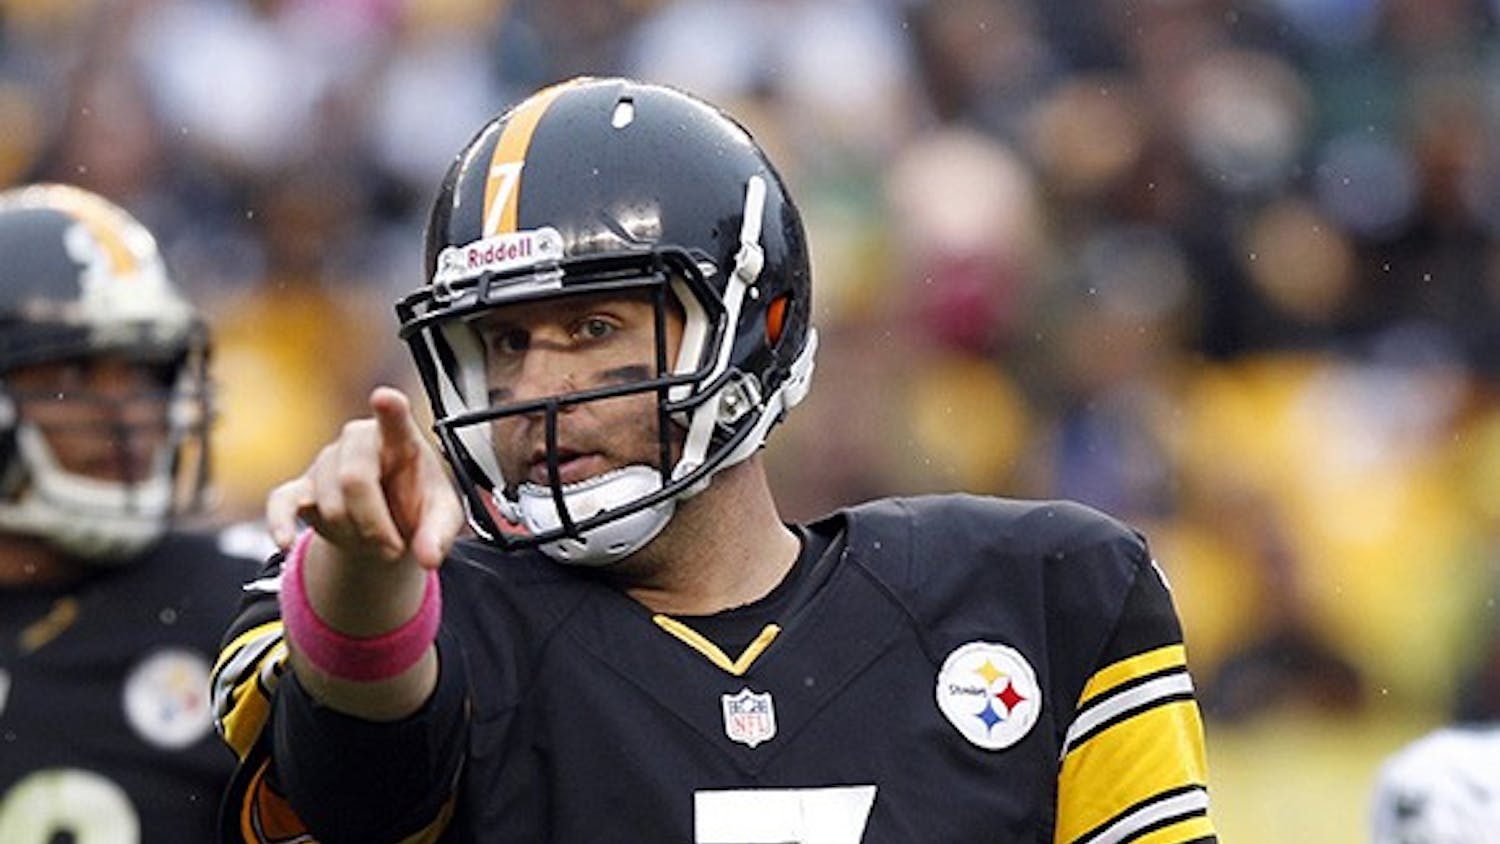 Pittsburgh Steelers&apos; Ben Roethlisberger points to the Steelers&apos; bench during the late fourth quarter winning drive against the Eagles on Sunday, October 7, 2012, in Pittsburgh, Pennsylvania. The Pittsburgh Steelers defeated the Philadelphia Eagles, 16-14. (Yong Kim/Philadelphia Daily News/MCT)